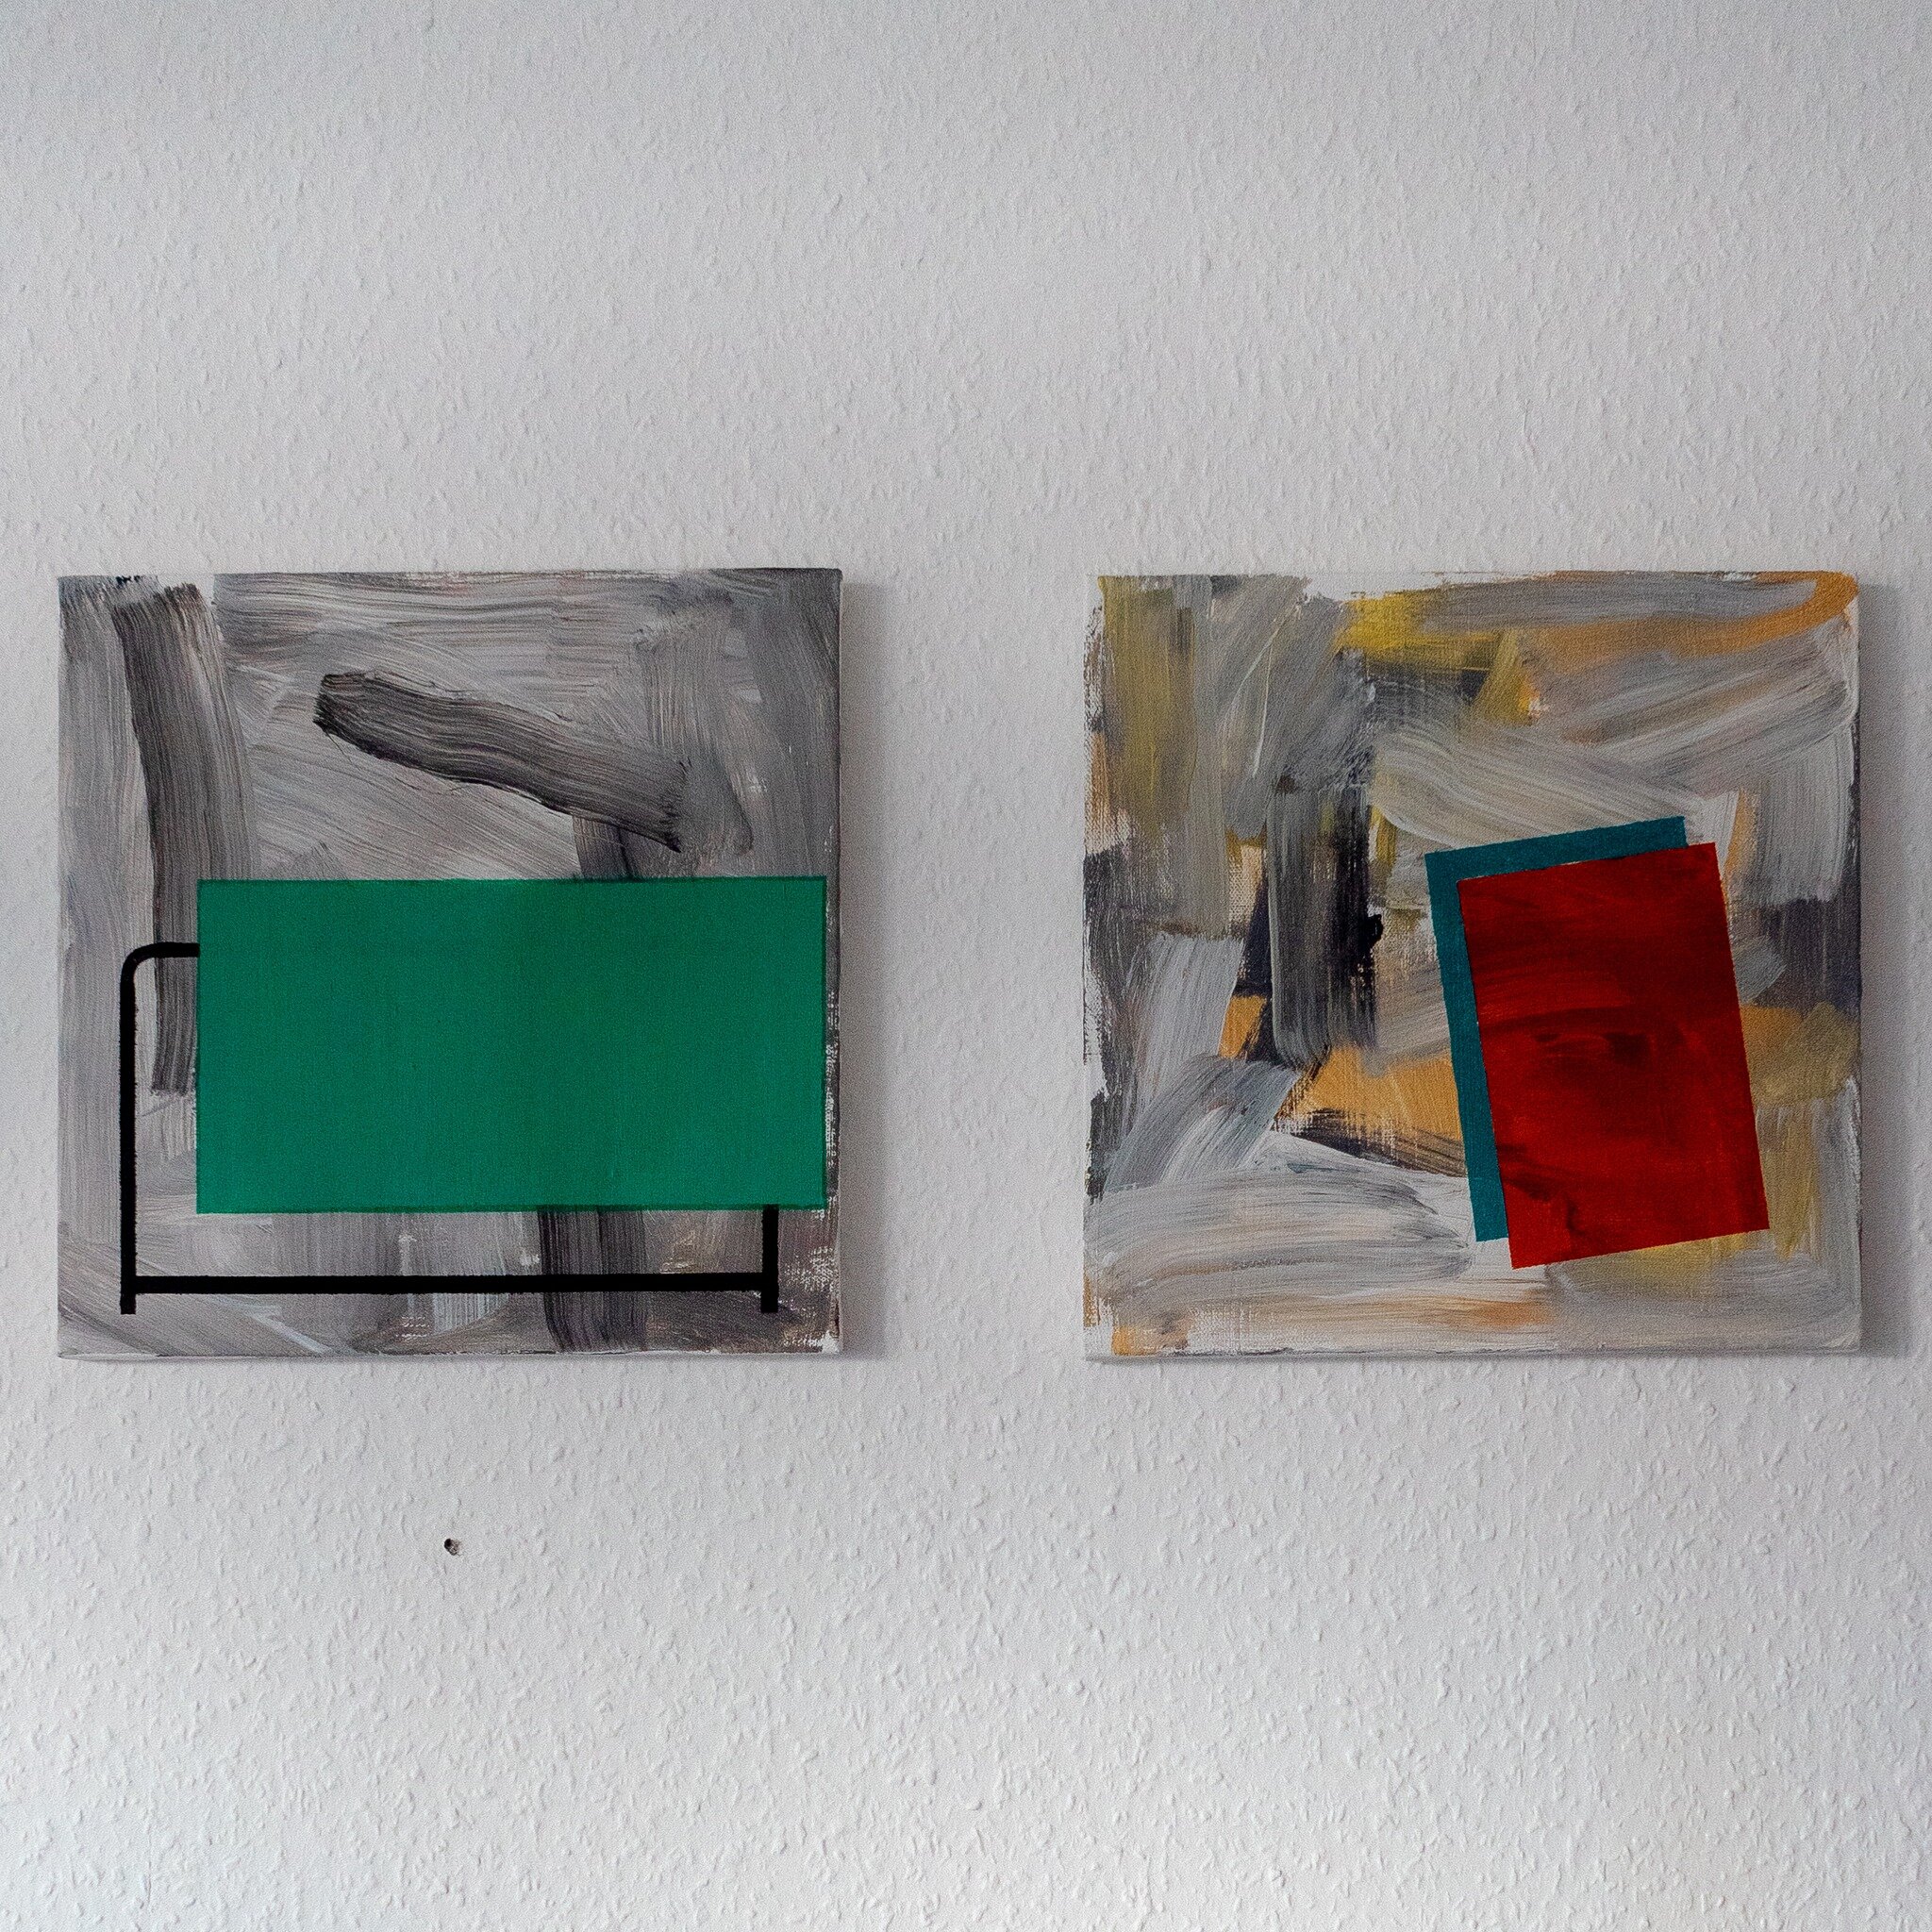 Two small square canvases on the studio wall. Work in progress from this last week.

These two are part of a new series that are inspired by construction site hoardings, temporary fencing and taped off areas in the urban environment. I've been saving